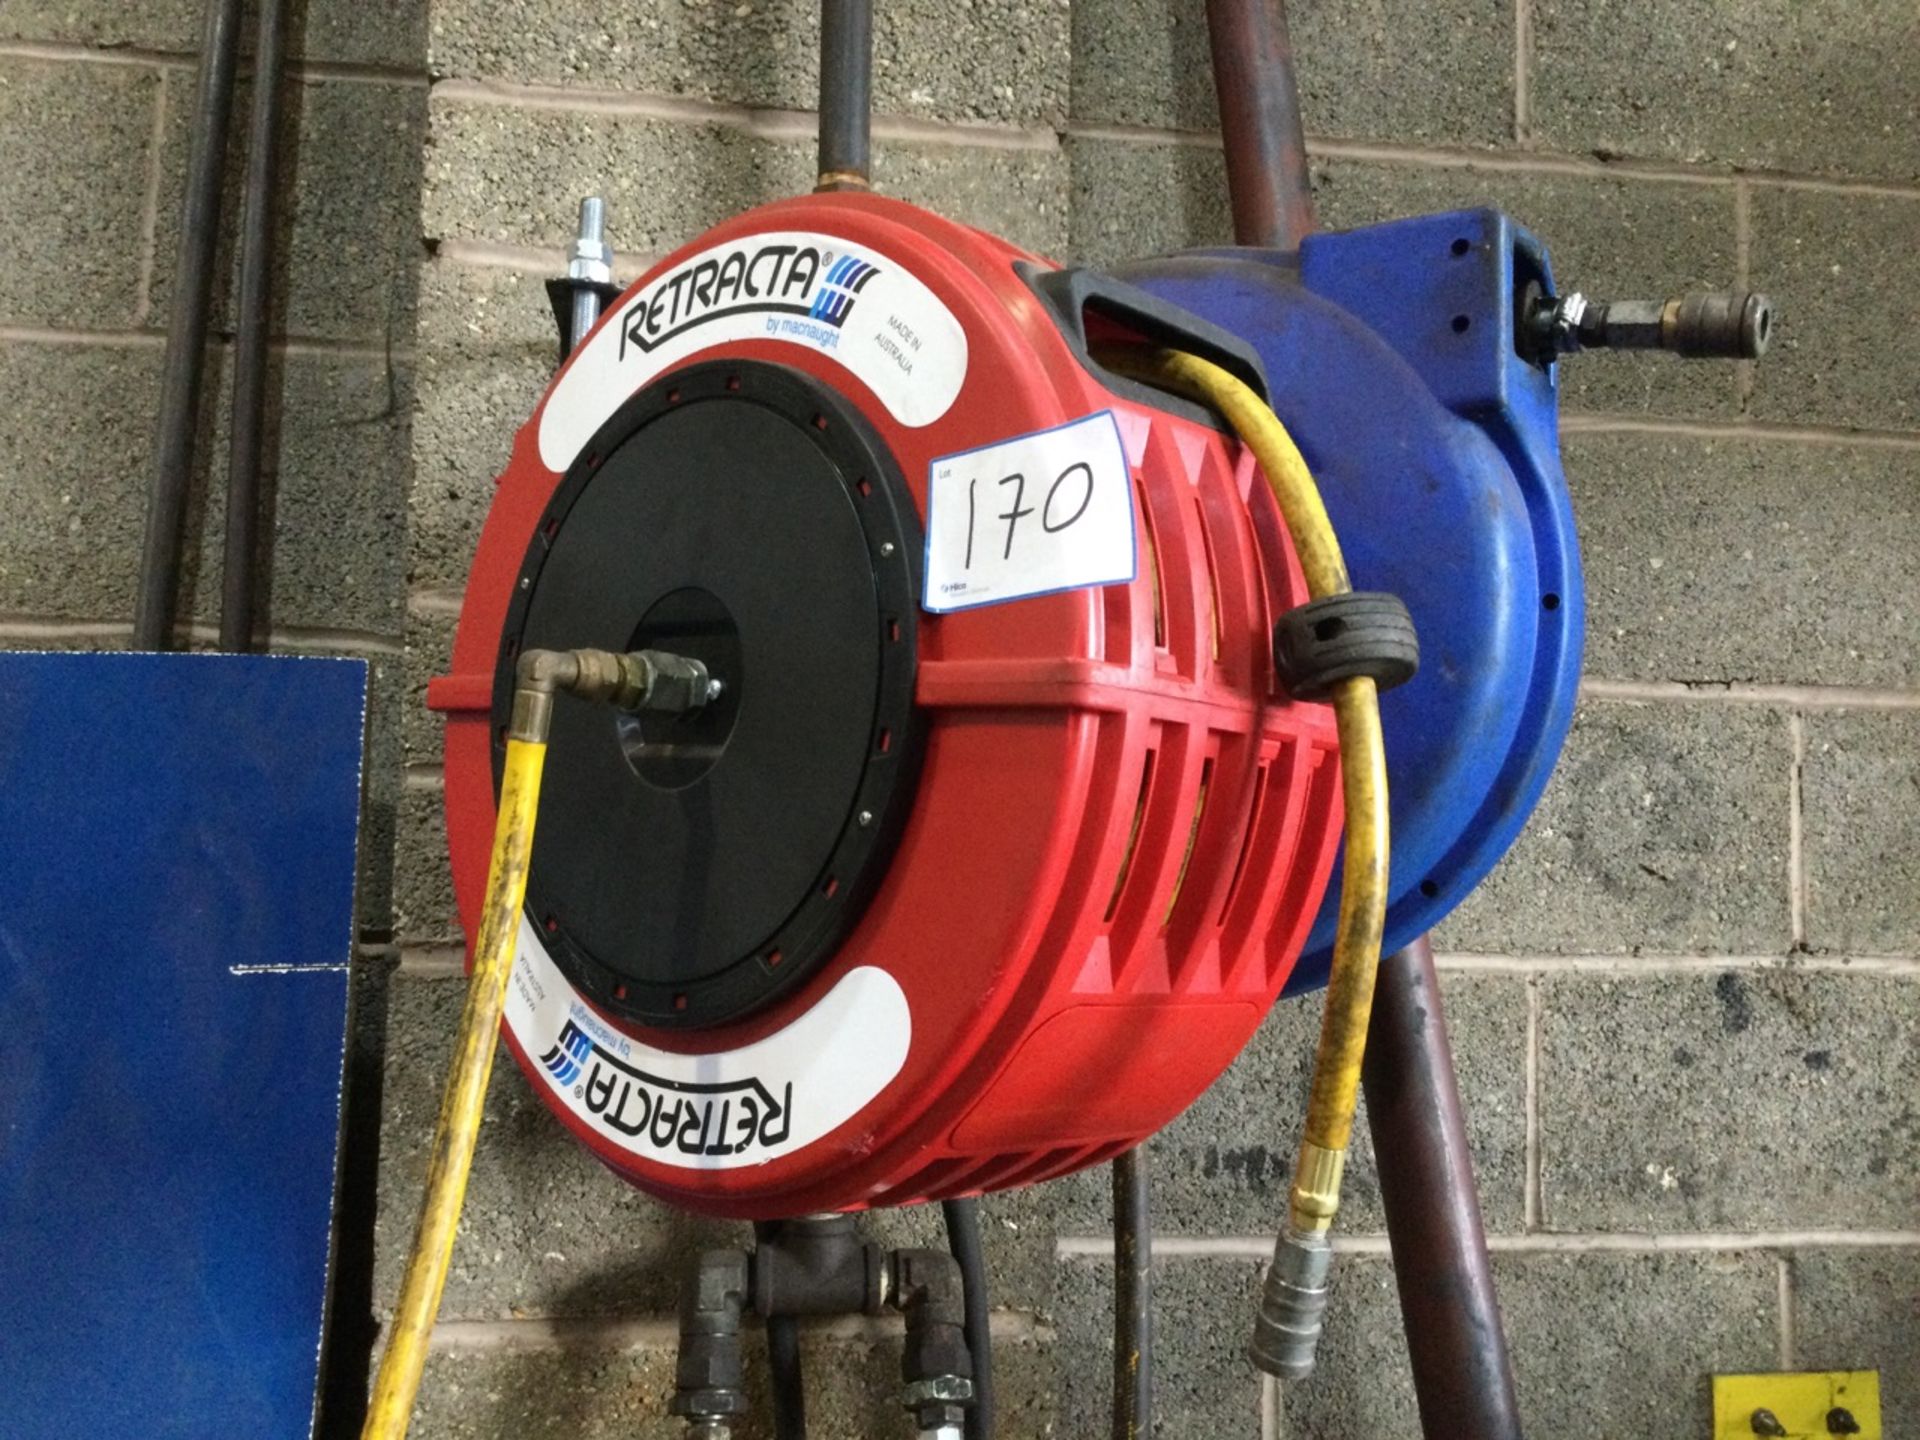 2: Wall Mounted Spring Loaded Hose Reel Units